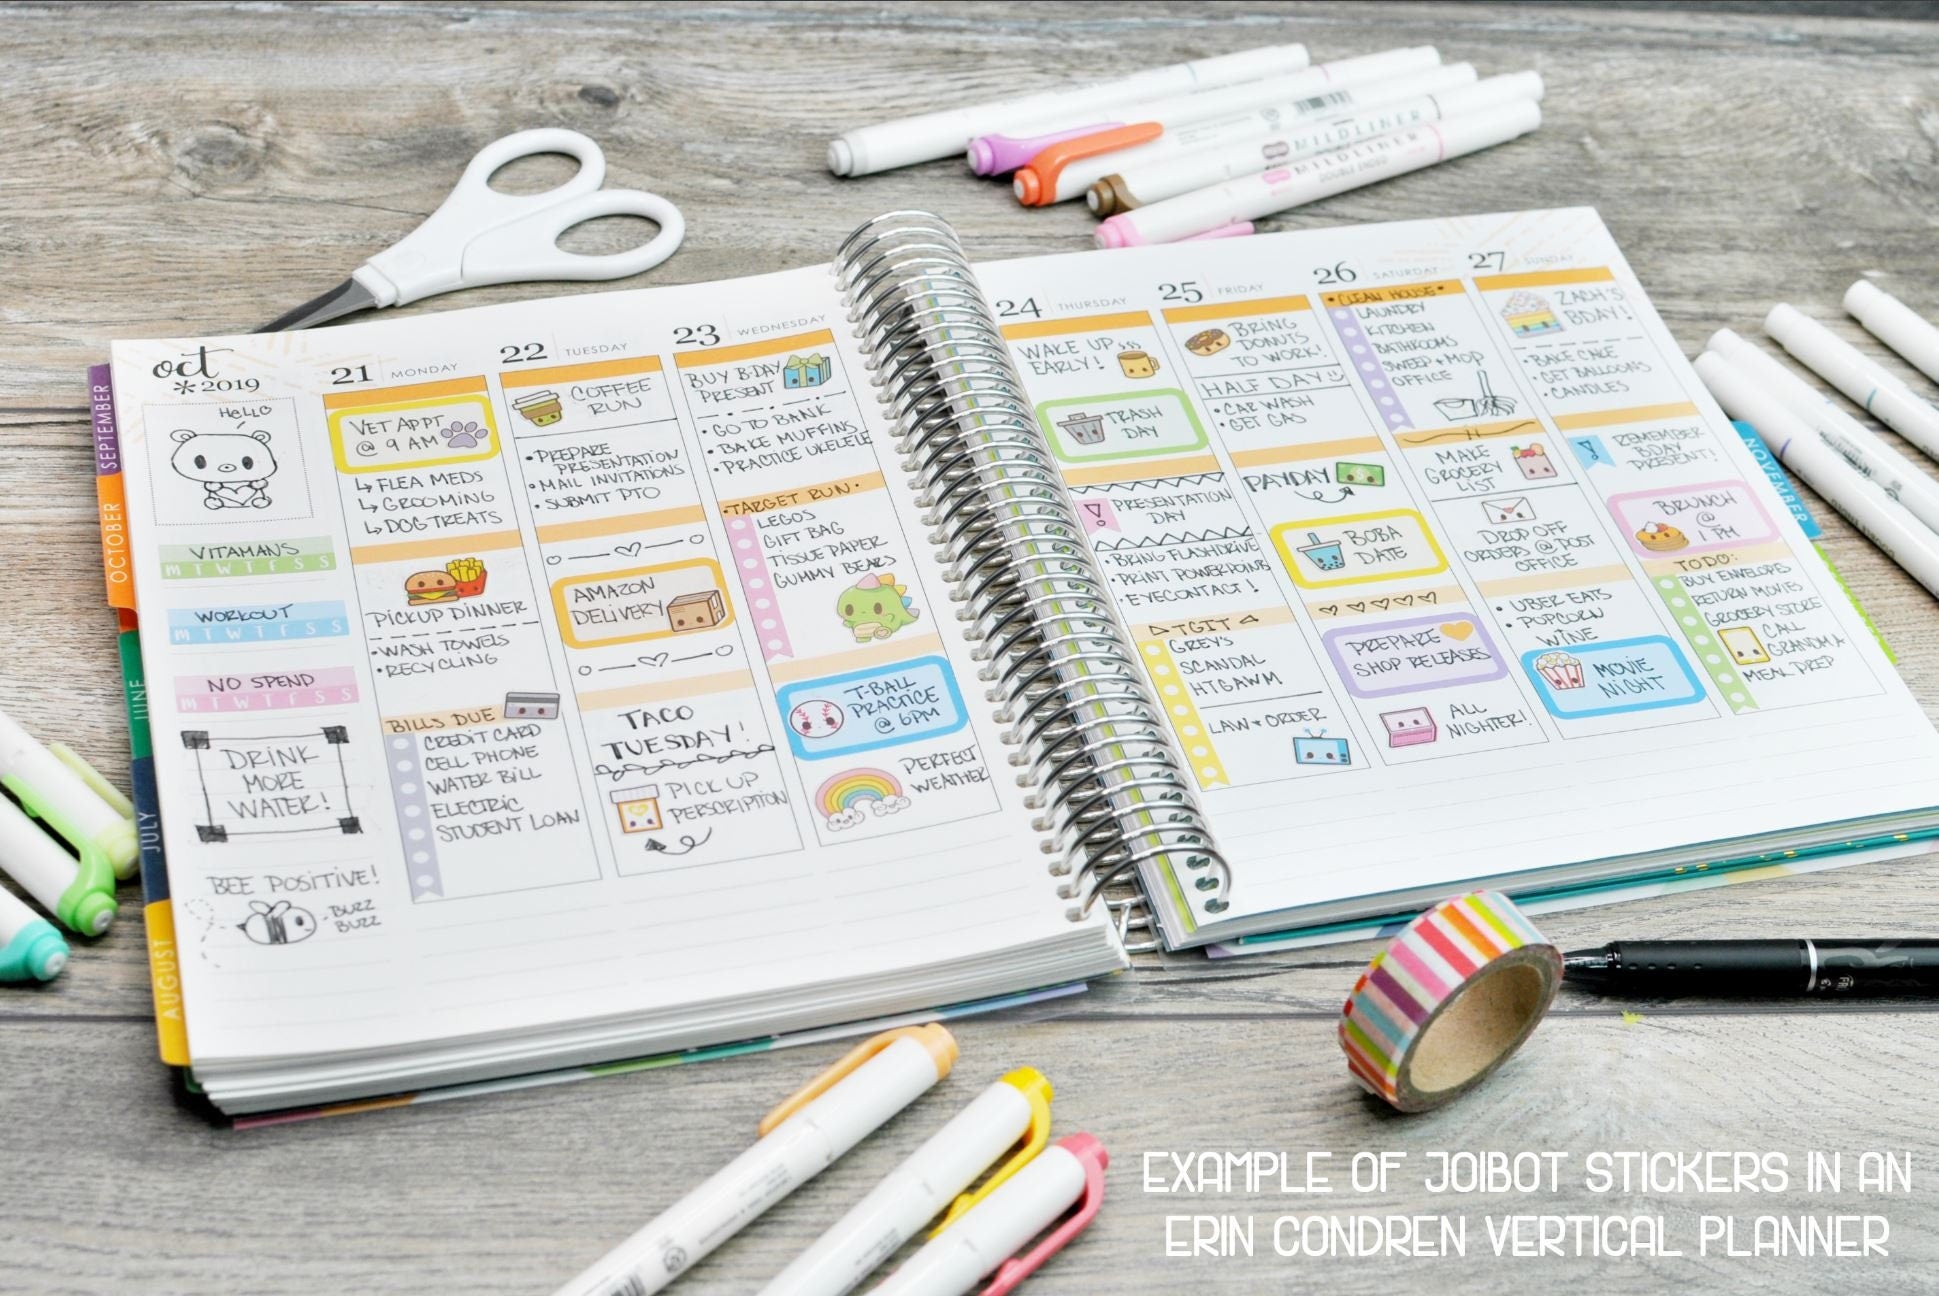 GAME NIGHT - Kawaii Planner Stickers - Doodle Club Stickers - Journal Stickers - Cute Stickers - Decorative Stickers - Z0002